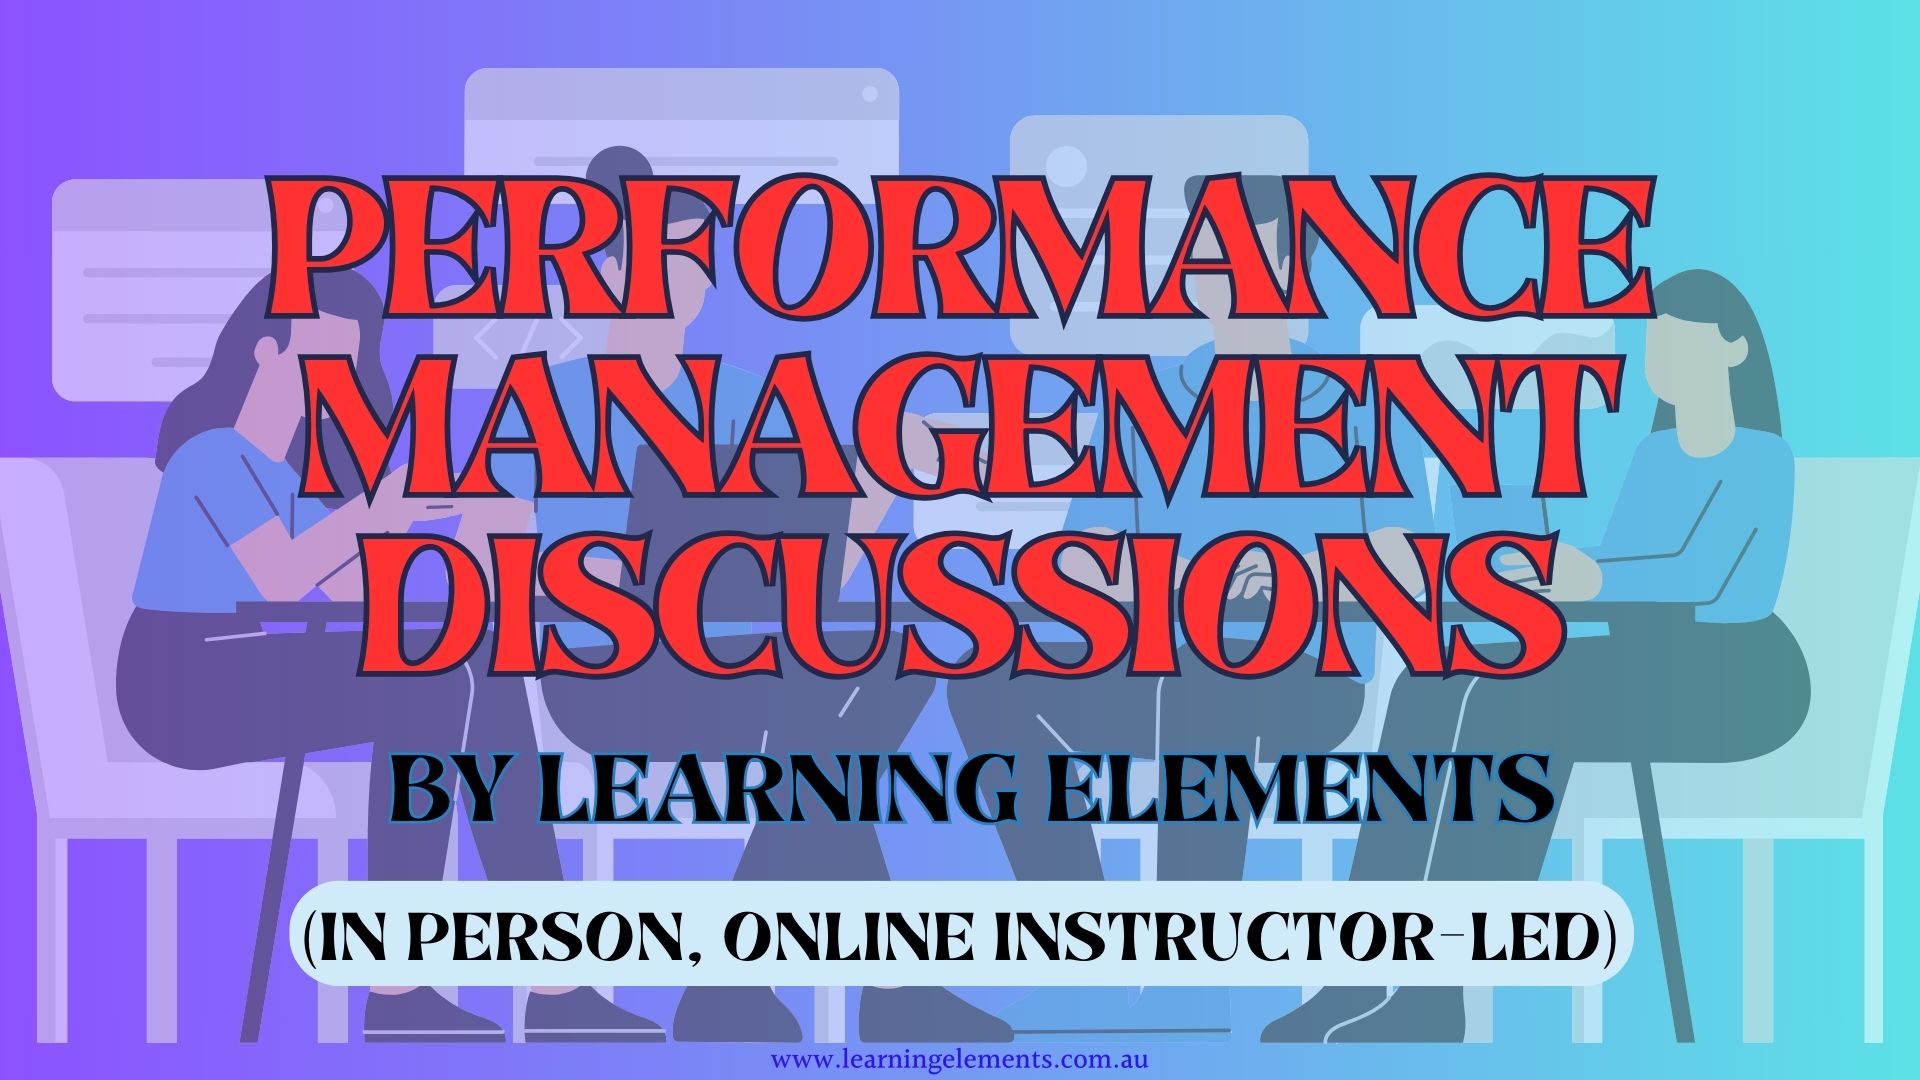 PERFORMANCE MANAGEMENT DISCUSSIONS